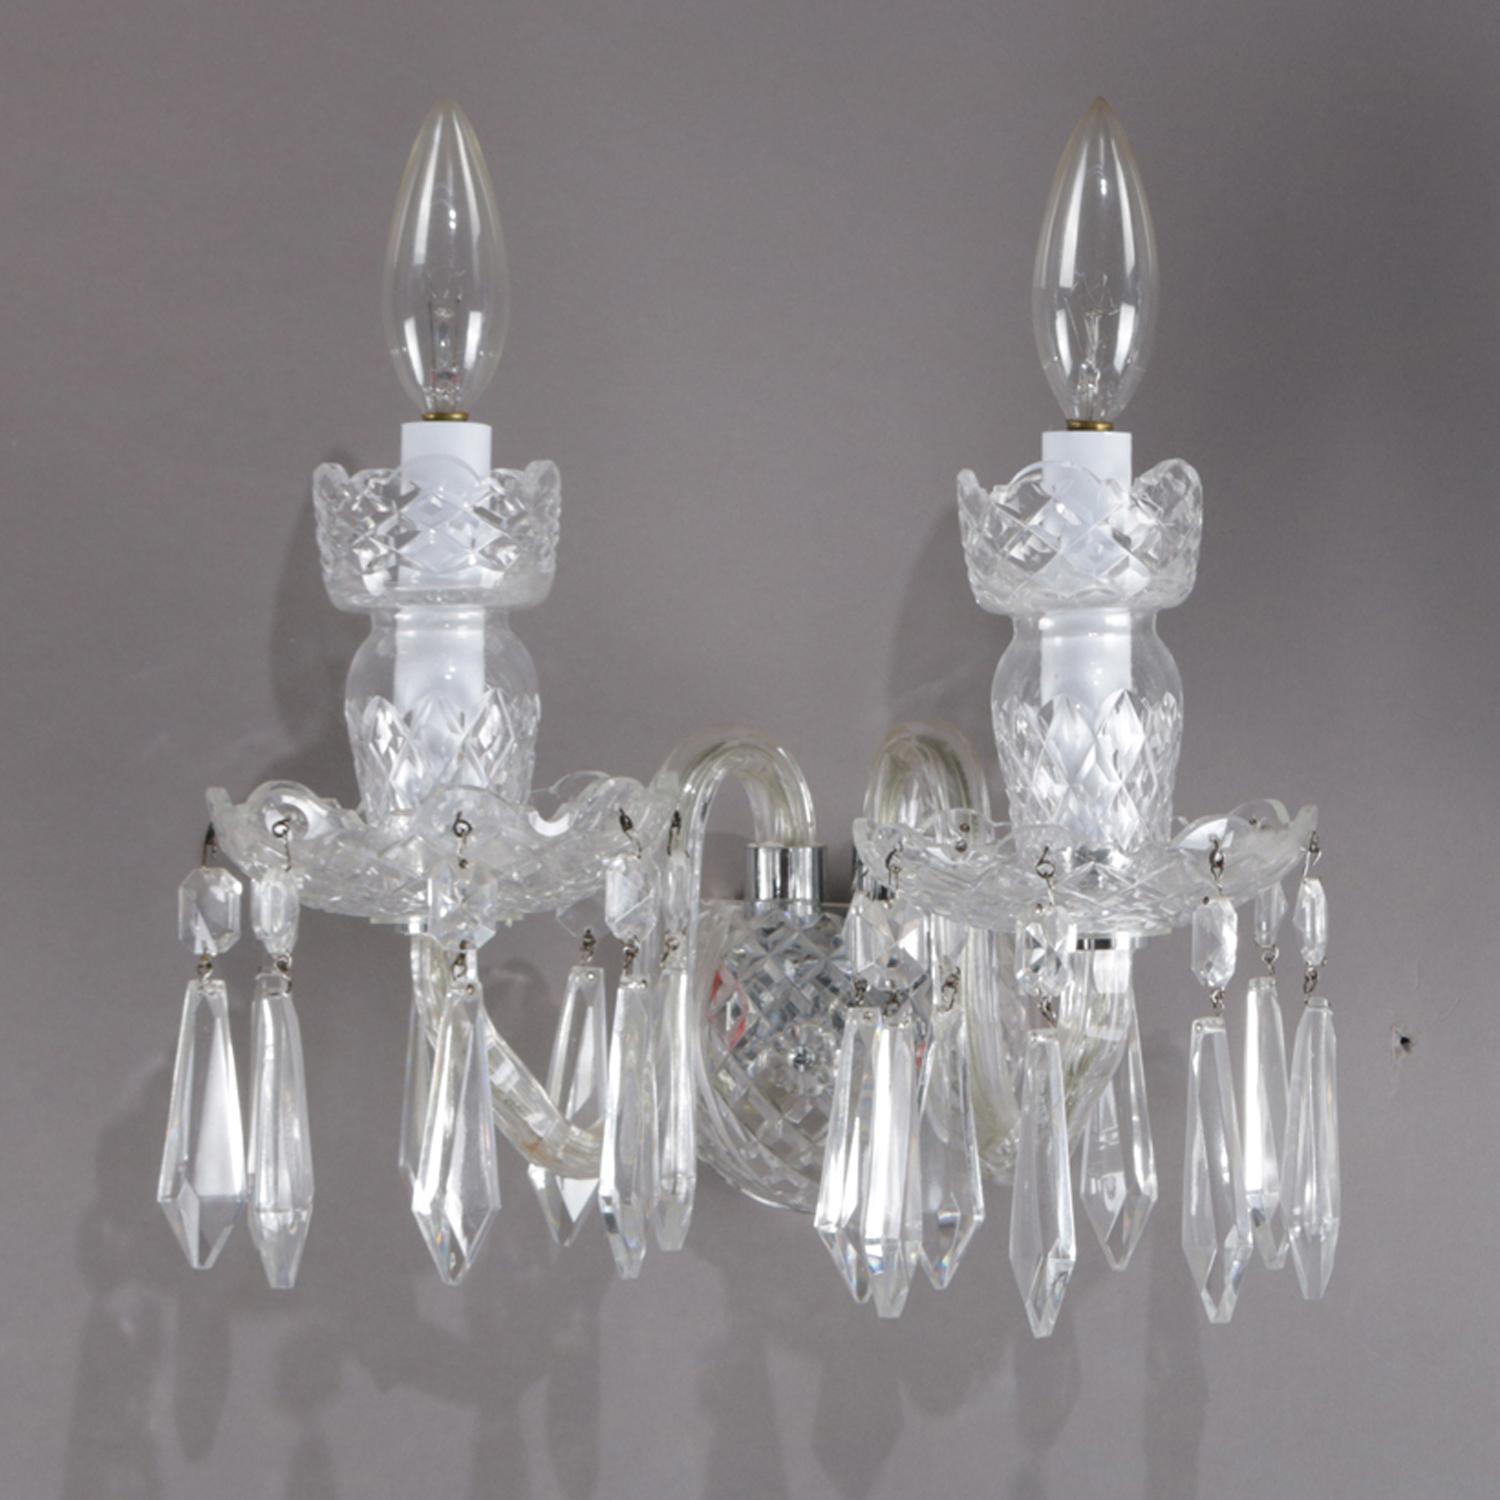 Pair of Irish Waterford Avoca wall sconces feature cut crystal base with S-scroll glass arms terminating in two candle lights with cut crystal casing and with hanging prisms, prisms marked 